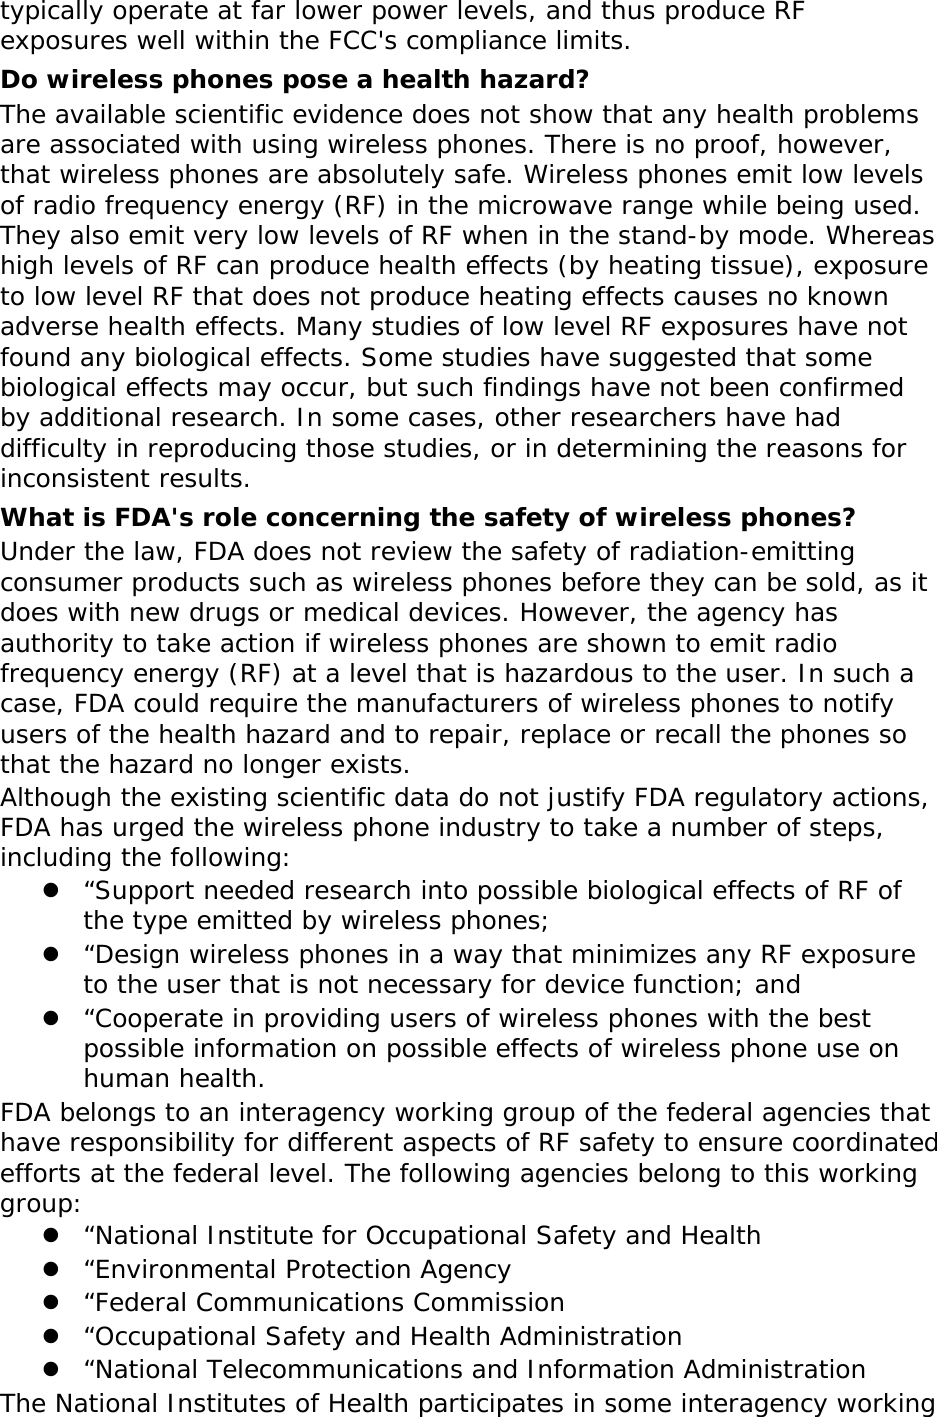 typically operate at far lower power levels, and thus produce RF exposures well within the FCC&apos;s compliance limits. Do wireless phones pose a health hazard? The available scientific evidence does not show that any health problems are associated with using wireless phones. There is no proof, however, that wireless phones are absolutely safe. Wireless phones emit low levels of radio frequency energy (RF) in the microwave range while being used. They also emit very low levels of RF when in the stand-by mode. Whereas high levels of RF can produce health effects (by heating tissue), exposure to low level RF that does not produce heating effects causes no known adverse health effects. Many studies of low level RF exposures have not found any biological effects. Some studies have suggested that some biological effects may occur, but such findings have not been confirmed by additional research. In some cases, other researchers have had difficulty in reproducing those studies, or in determining the reasons for inconsistent results. What is FDA&apos;s role concerning the safety of wireless phones? Under the law, FDA does not review the safety of radiation-emitting consumer products such as wireless phones before they can be sold, as it does with new drugs or medical devices. However, the agency has authority to take action if wireless phones are shown to emit radio frequency energy (RF) at a level that is hazardous to the user. In such a case, FDA could require the manufacturers of wireless phones to notify users of the health hazard and to repair, replace or recall the phones so that the hazard no longer exists. Although the existing scientific data do not justify FDA regulatory actions, FDA has urged the wireless phone industry to take a number of steps, including the following:  “Support needed research into possible biological effects of RF of the type emitted by wireless phones;  “Design wireless phones in a way that minimizes any RF exposure to the user that is not necessary for device function; and  “Cooperate in providing users of wireless phones with the best possible information on possible effects of wireless phone use on human health. FDA belongs to an interagency working group of the federal agencies that have responsibility for different aspects of RF safety to ensure coordinated efforts at the federal level. The following agencies belong to this working group:  “National Institute for Occupational Safety and Health  “Environmental Protection Agency  “Federal Communications Commission  “Occupational Safety and Health Administration  “National Telecommunications and Information Administration The National Institutes of Health participates in some interagency working 